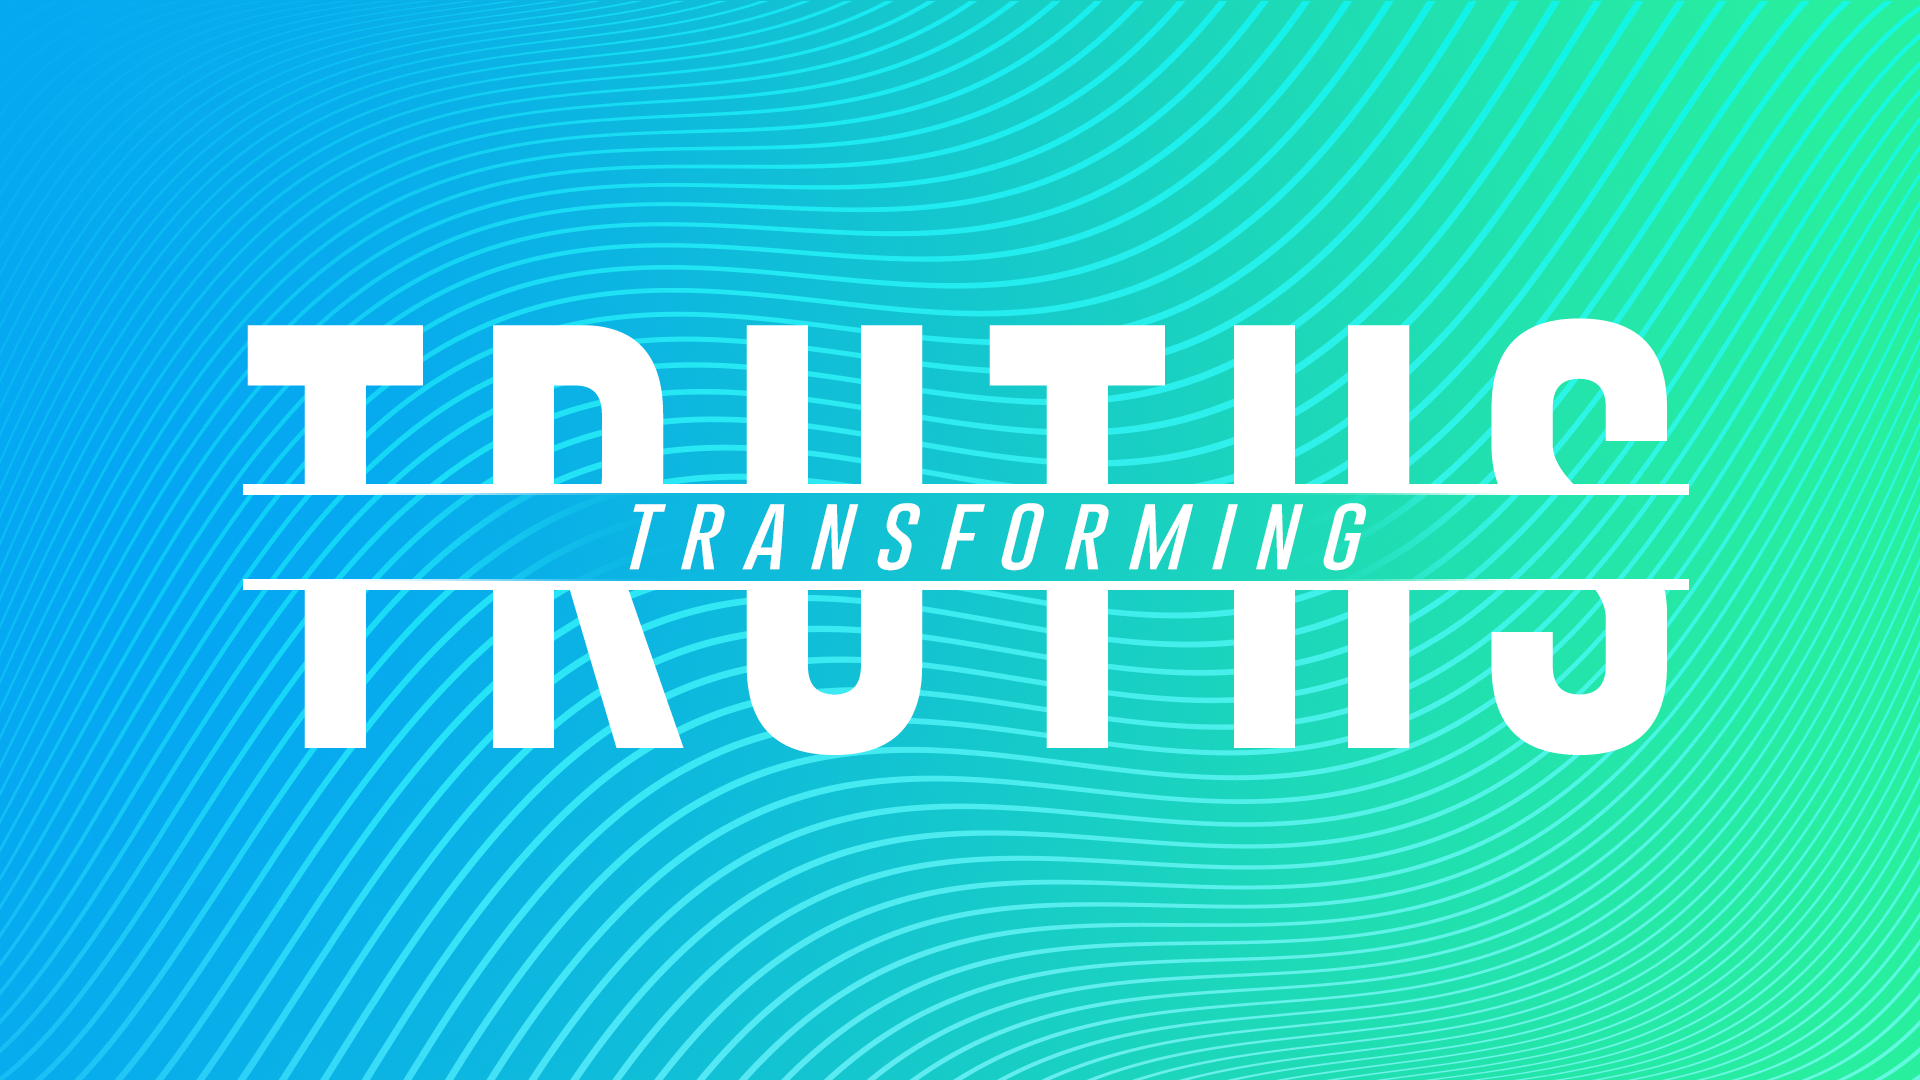 July 19, 2020 – Transforming Truths